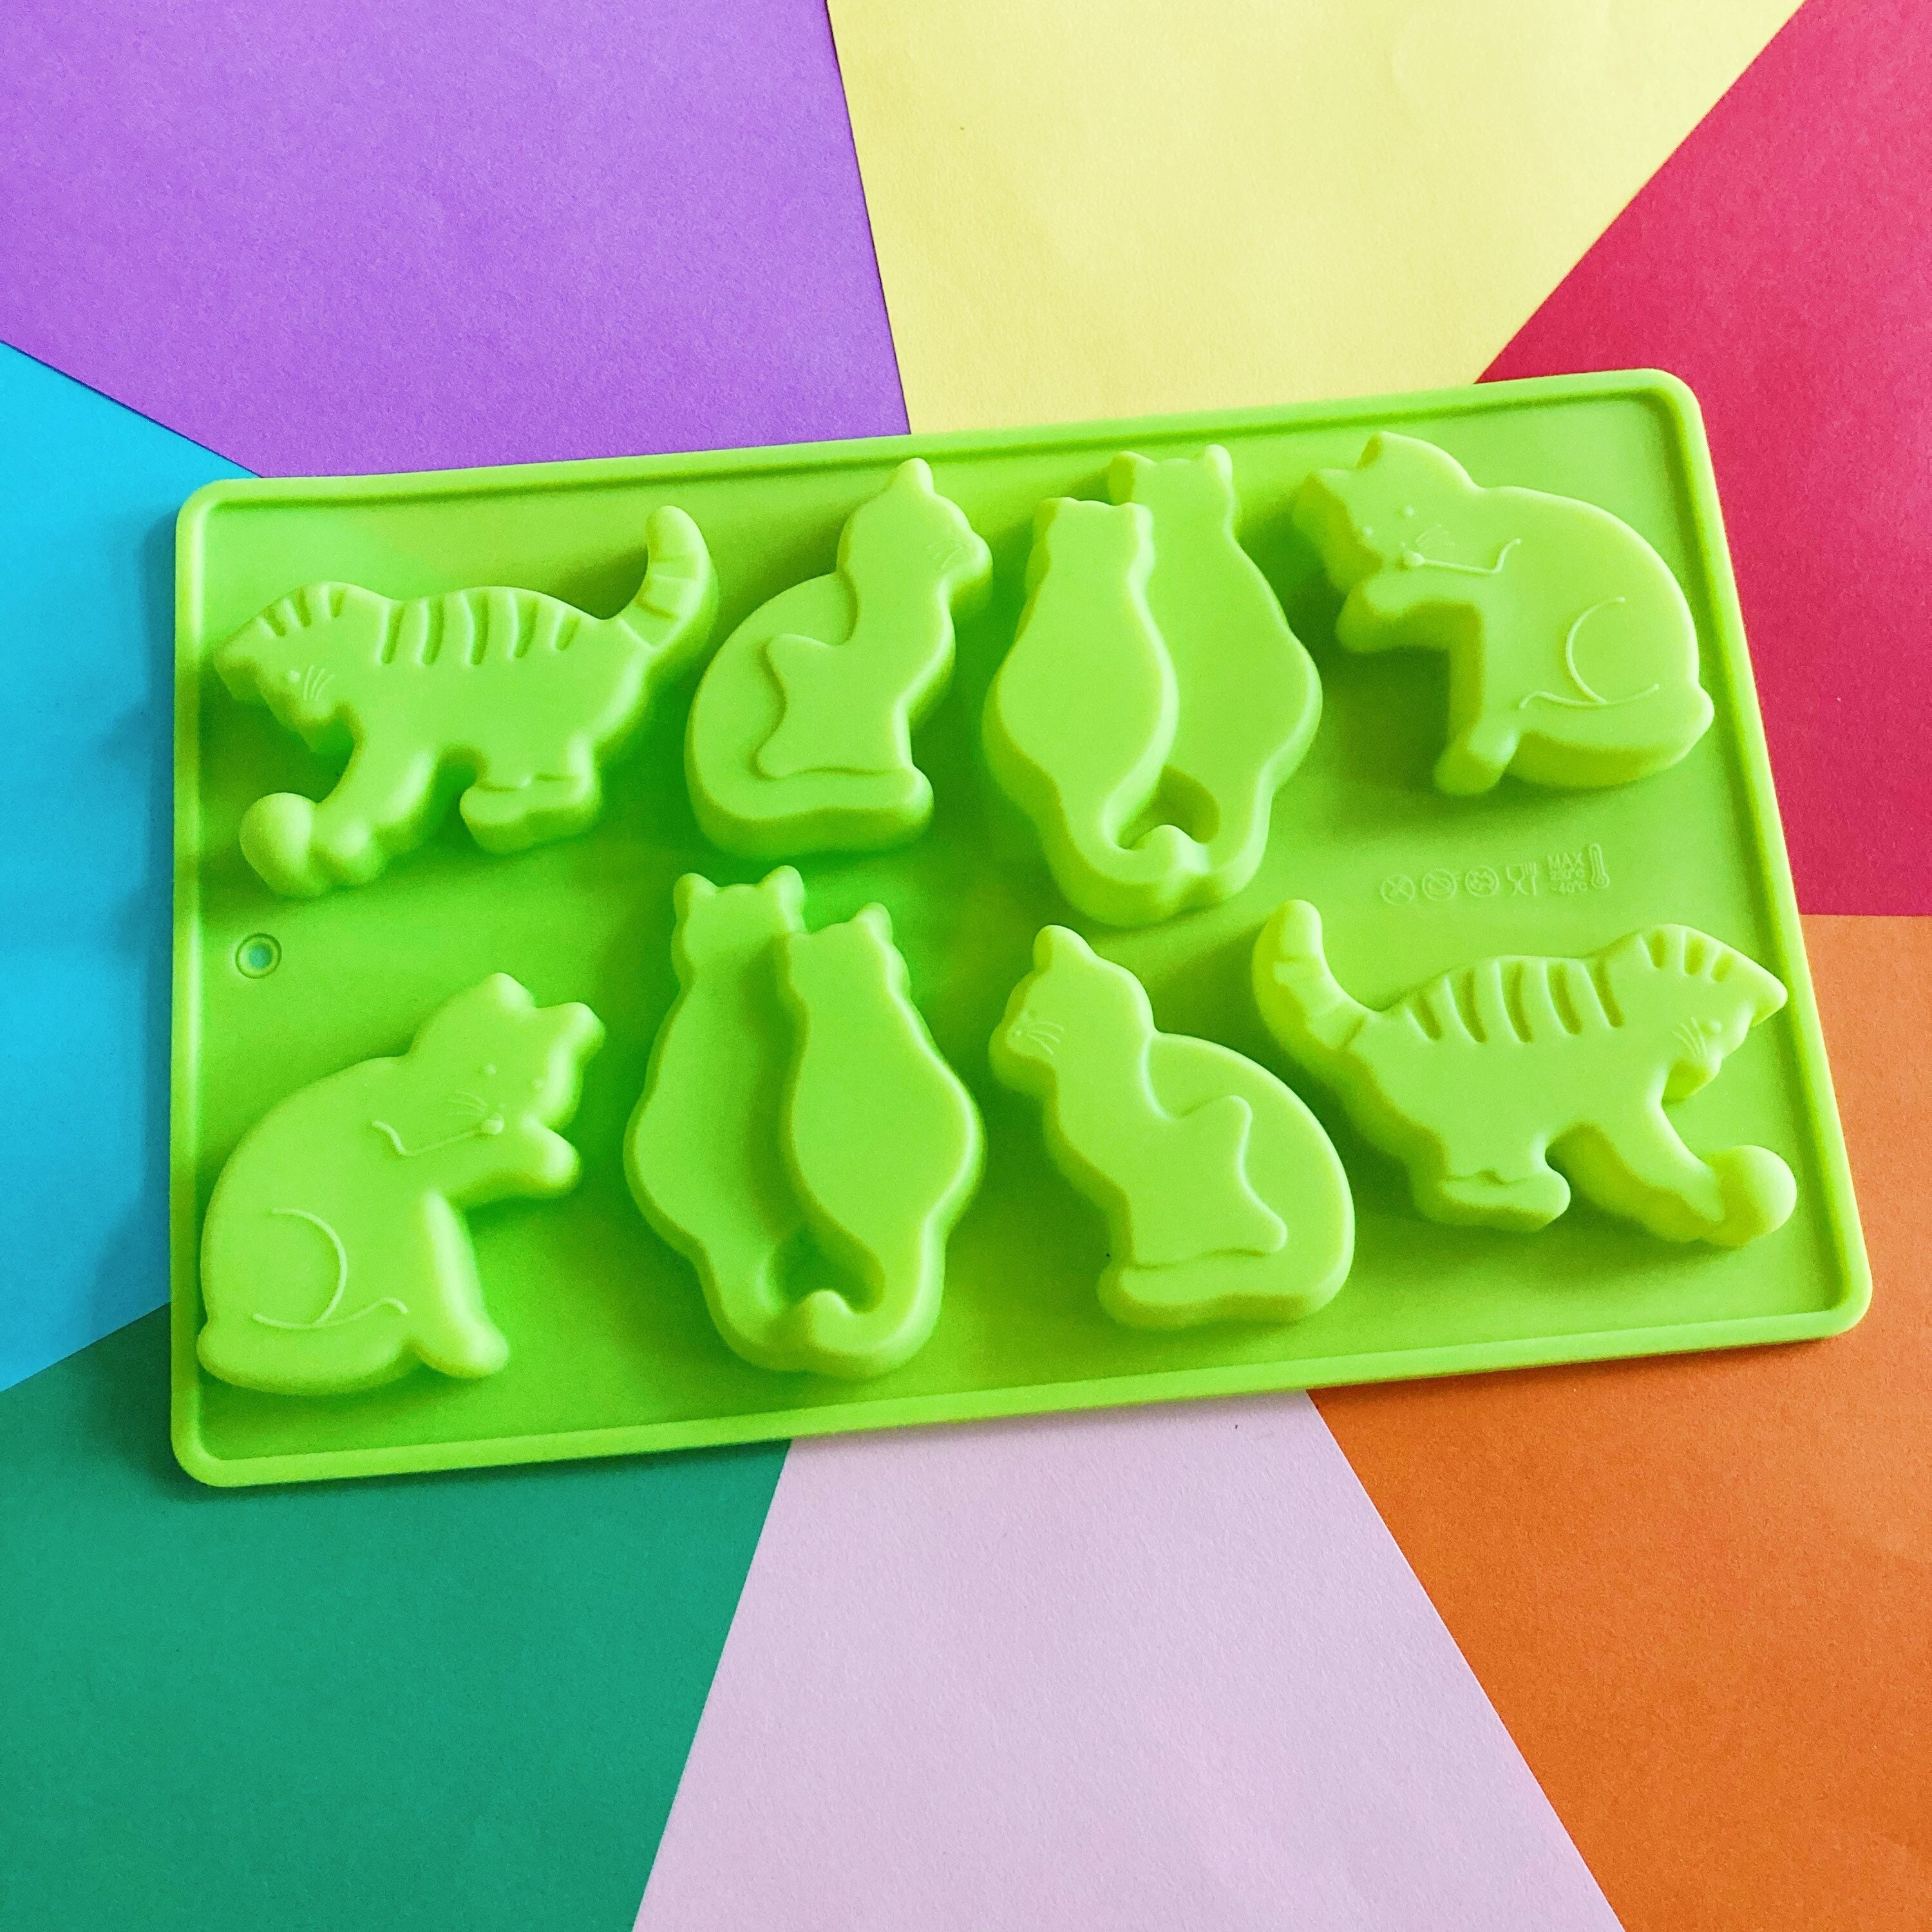 Cat Shaped Ice Cube Tray - Cats in different positions - Animal Replica Mold